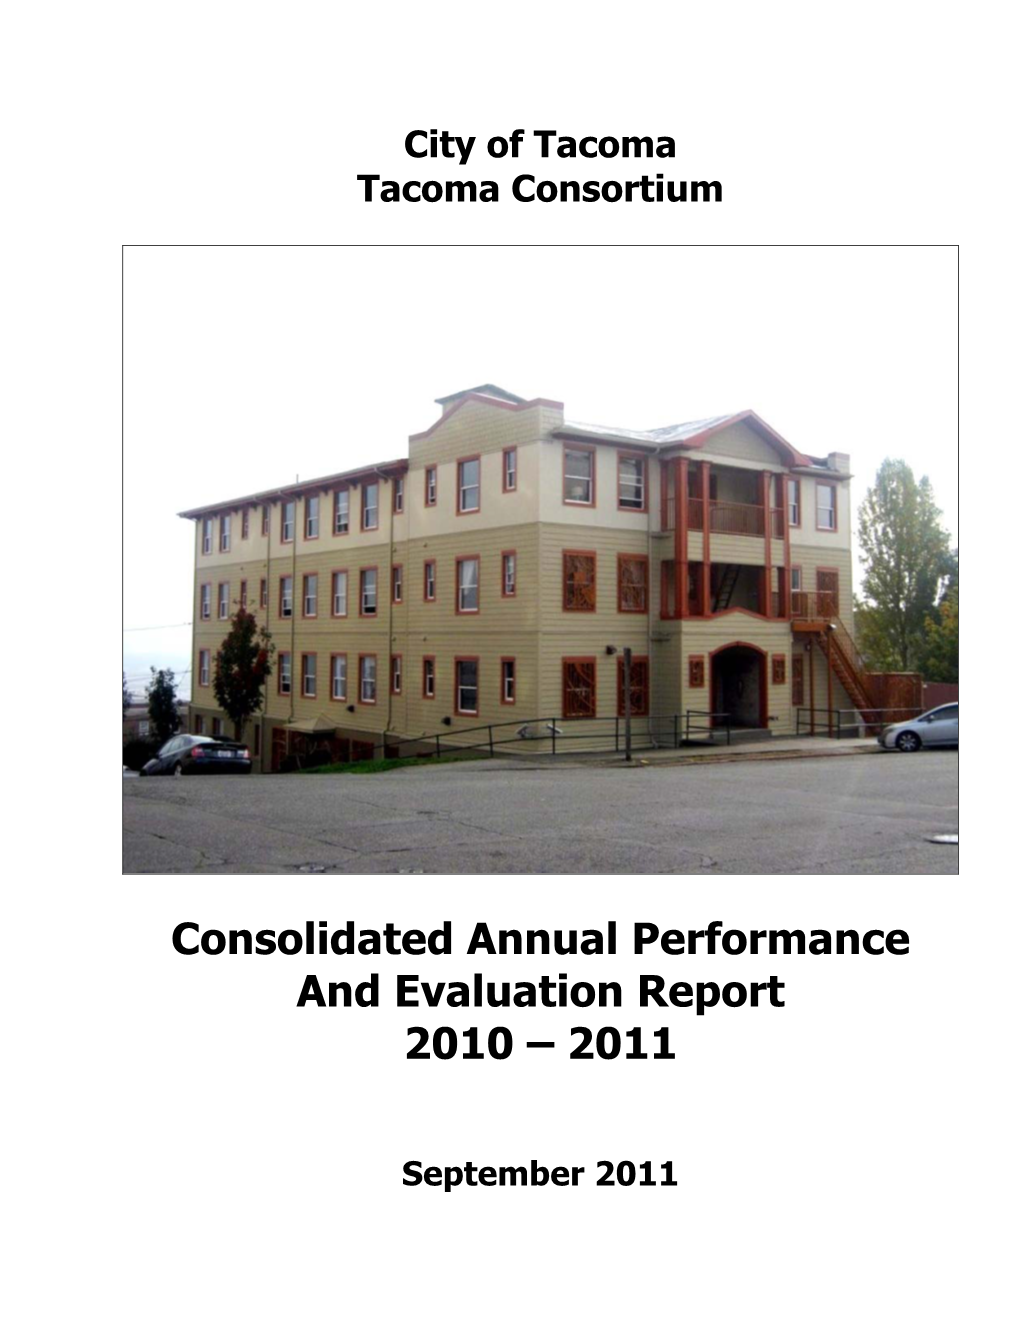 Consolidated Annual Performance and Evaluation Report 2010 – 2011